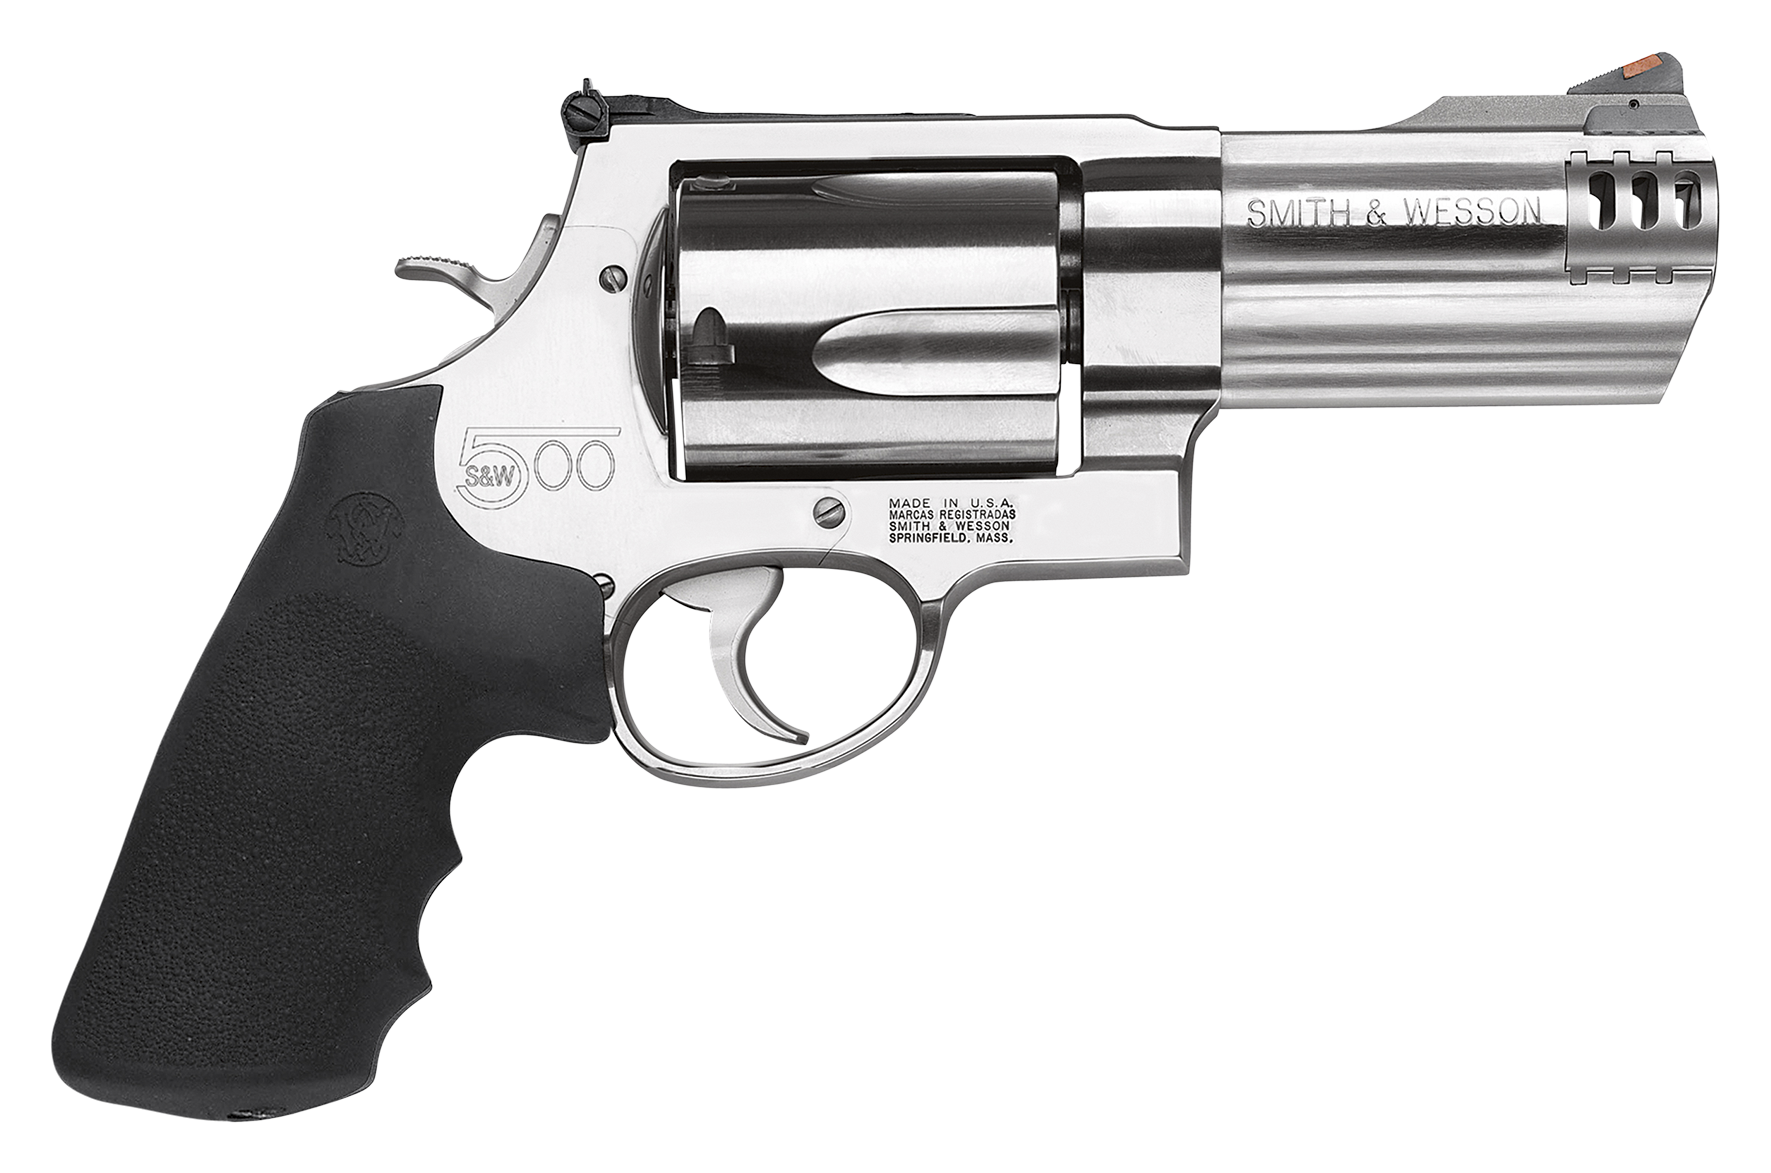 Smith  Wesson Model SW500 DoubleAction Revolver with Muzzle Compensator